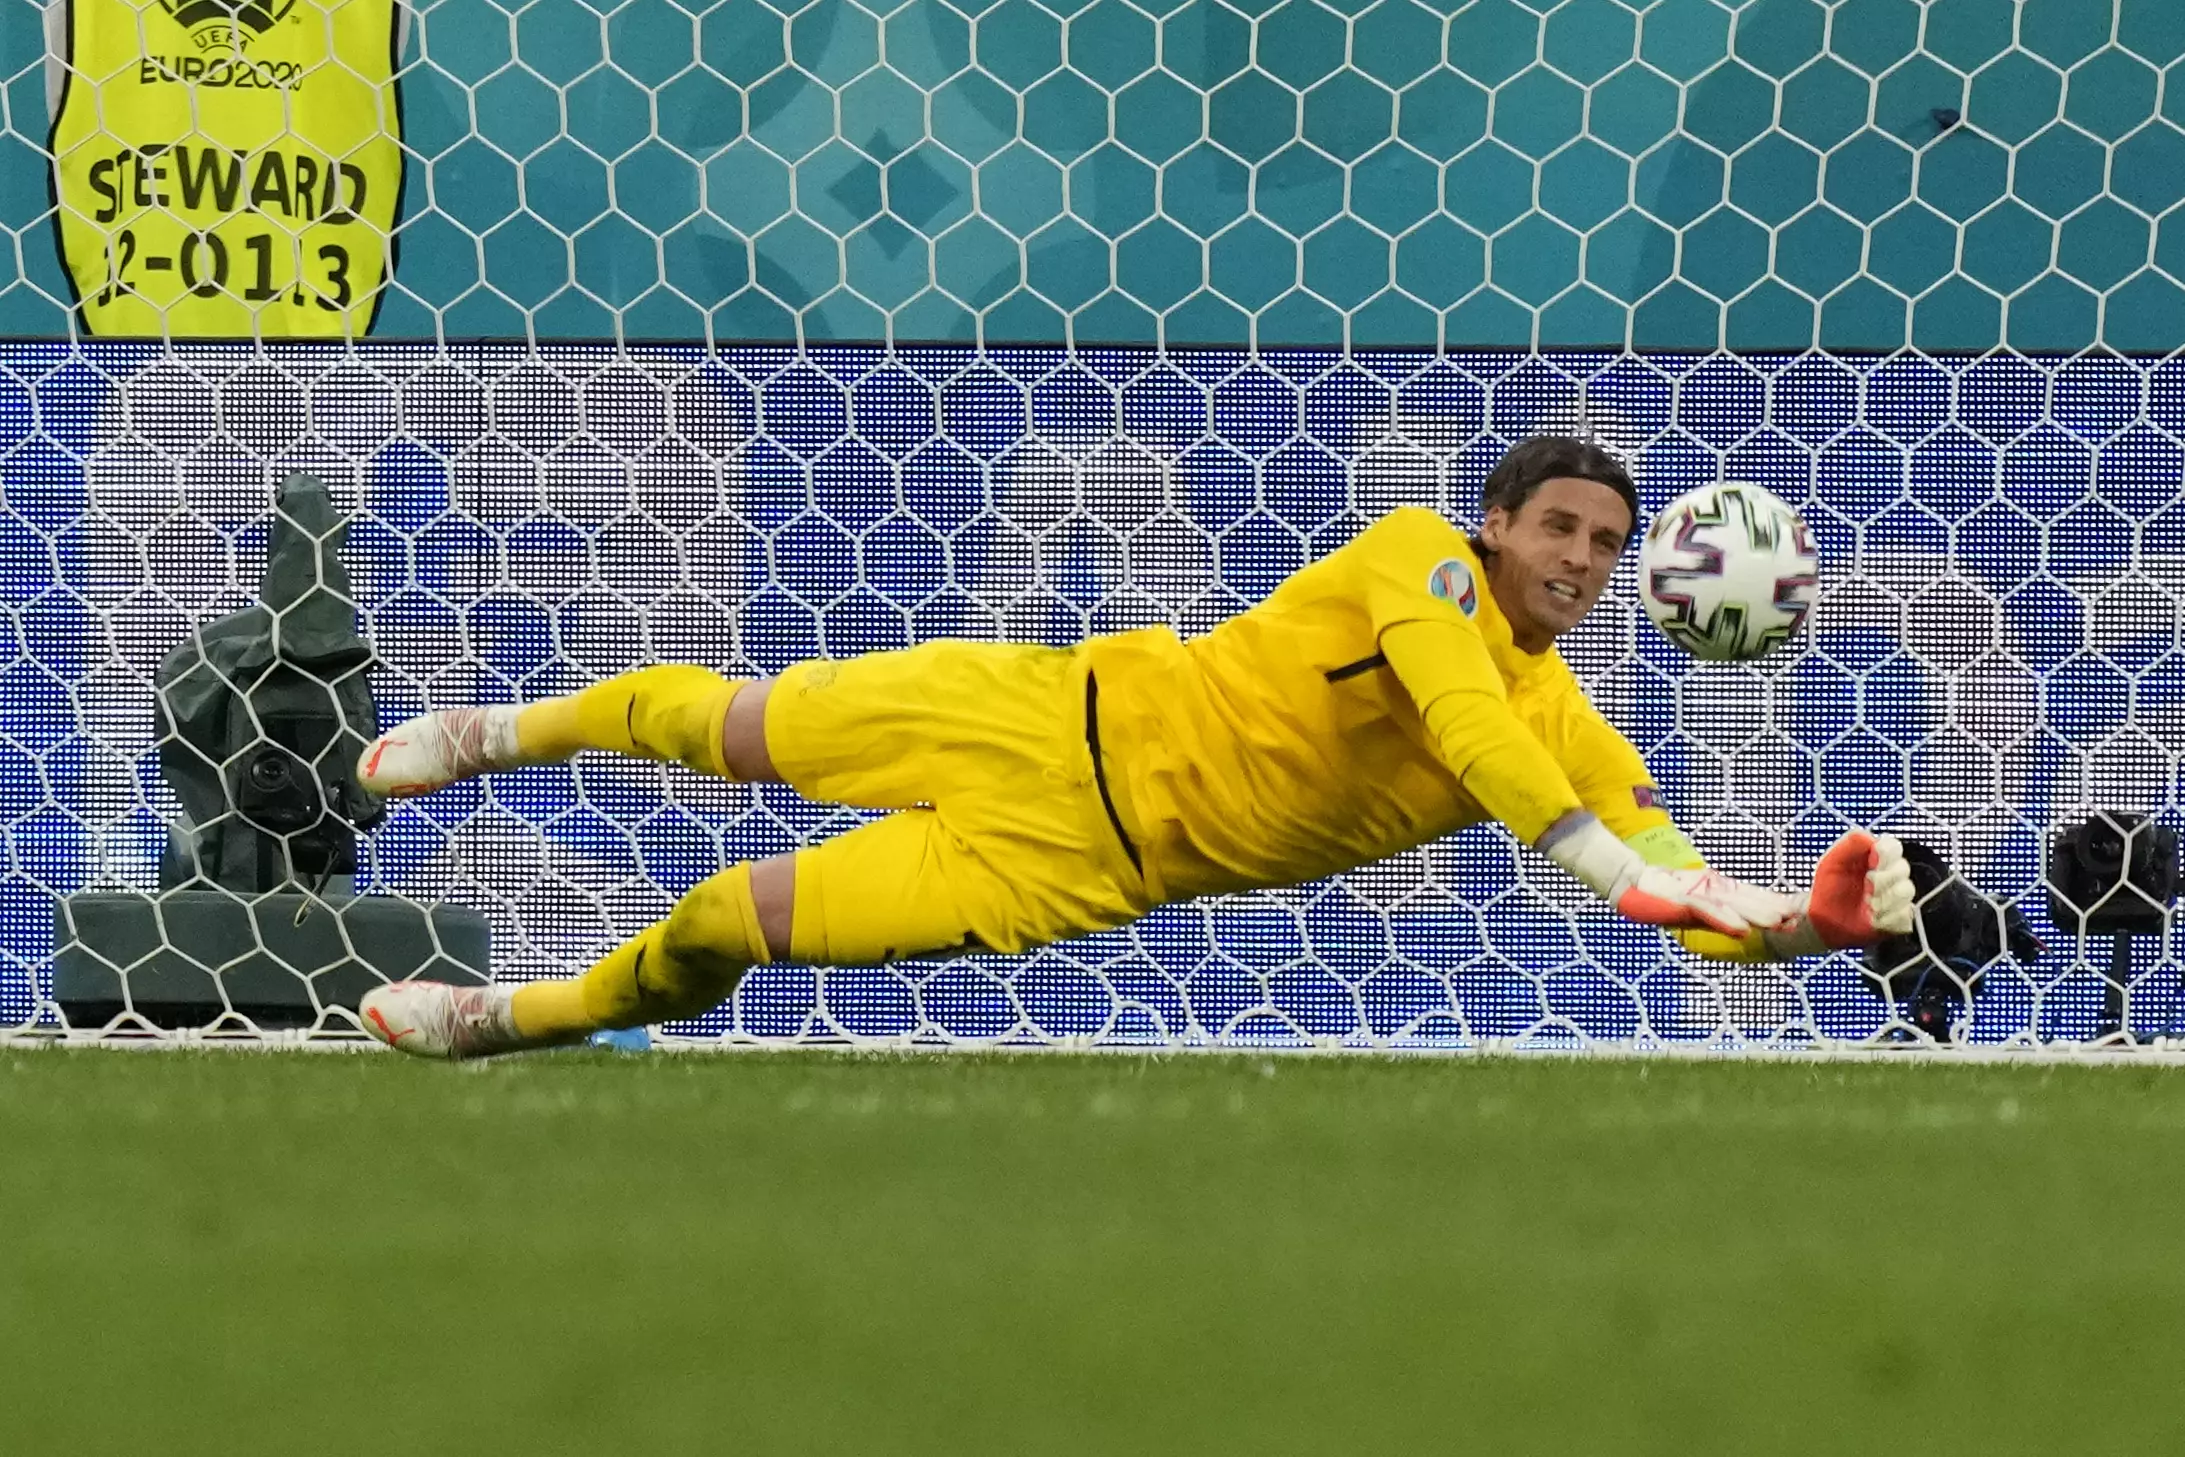 Yann Sommer was a hero even in defeat. Image: PA Images